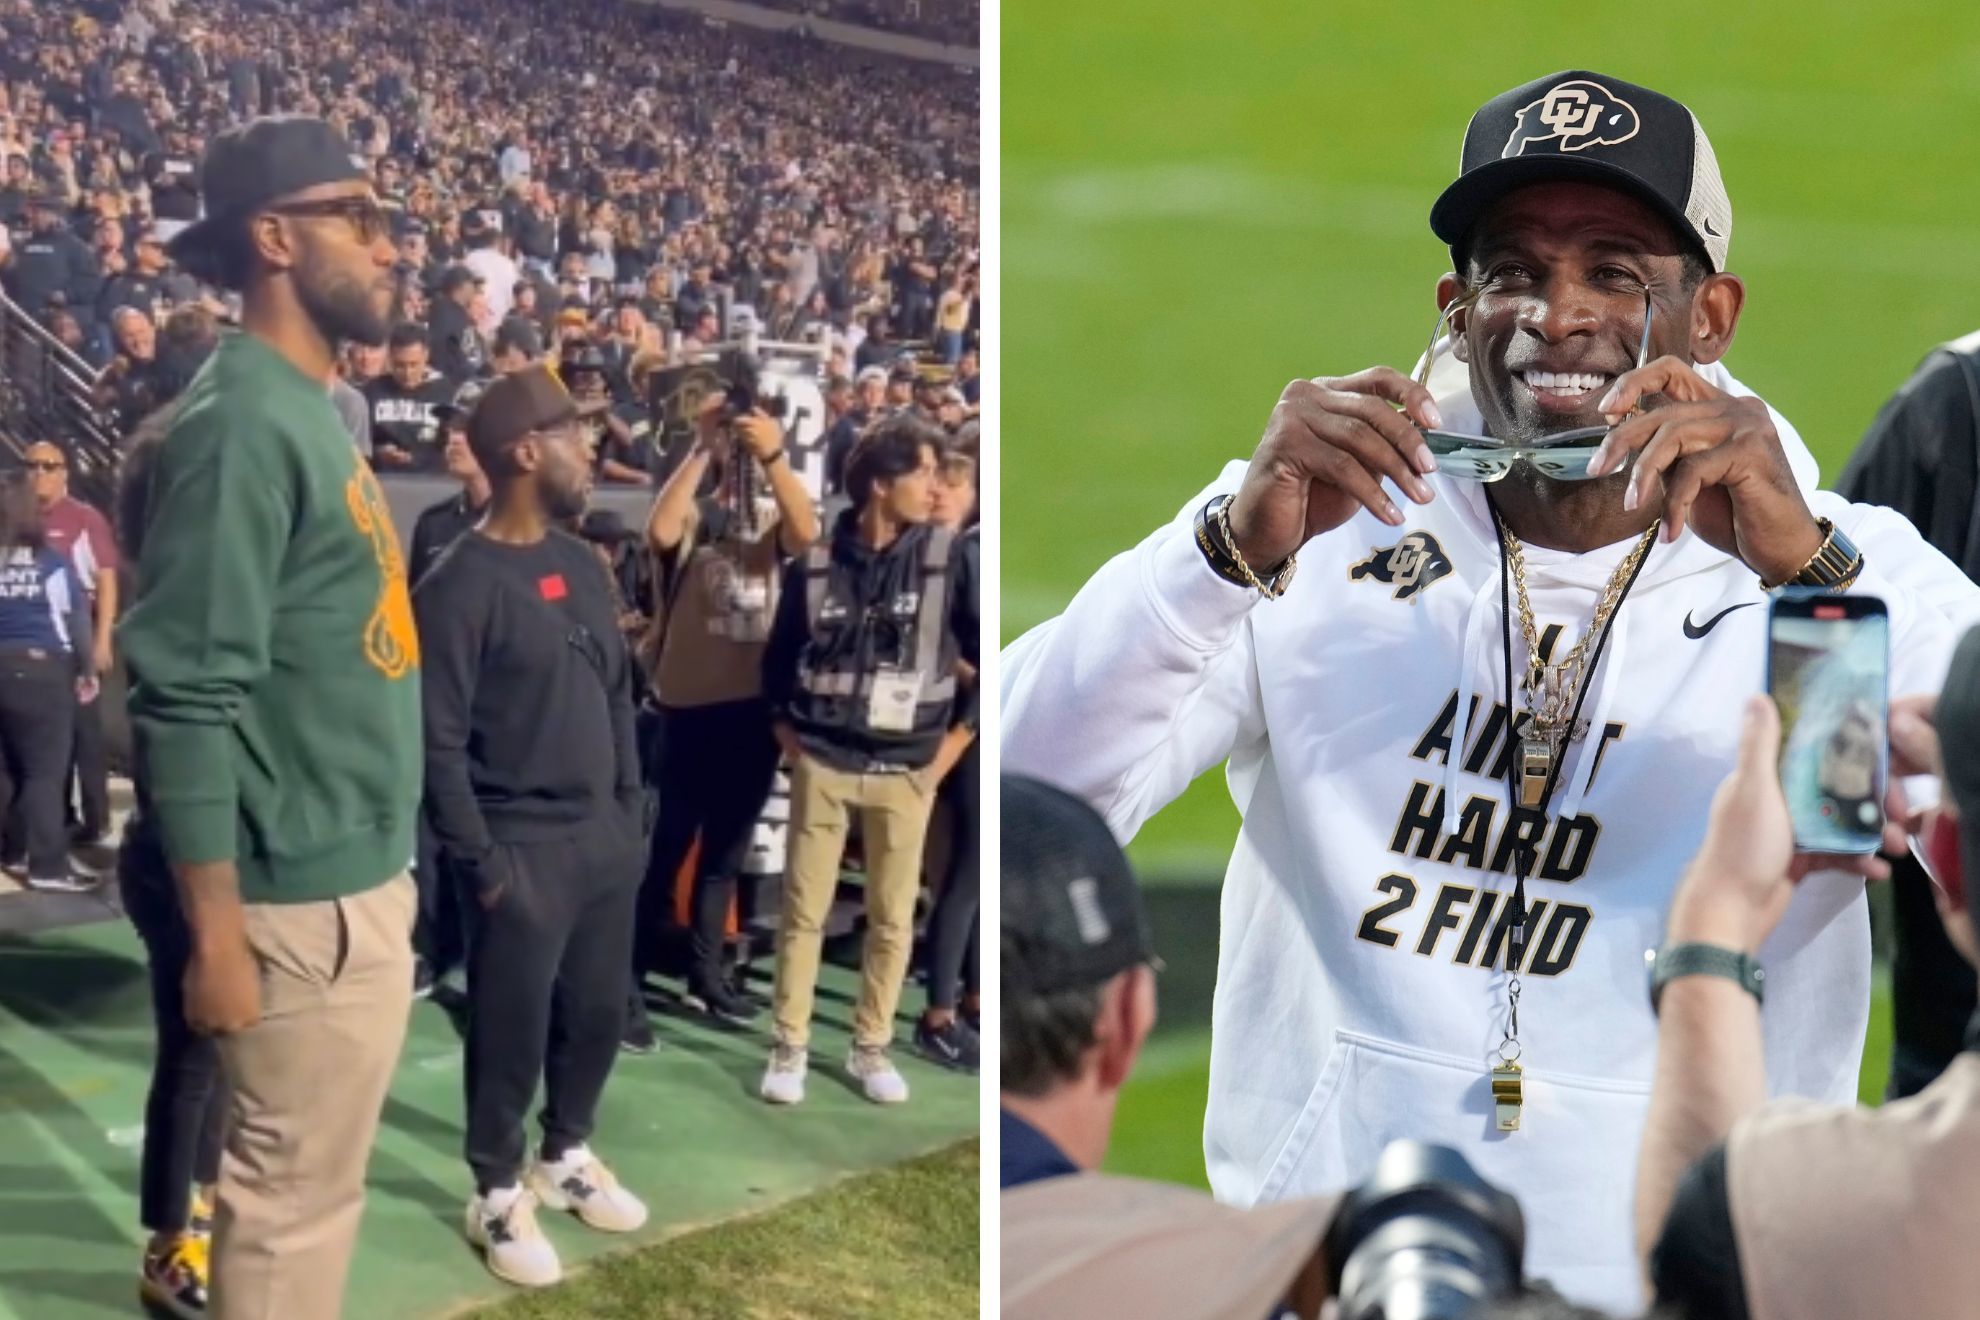 Clippers star Kawhi Leonard makes rare public appearance to support Buffaloes